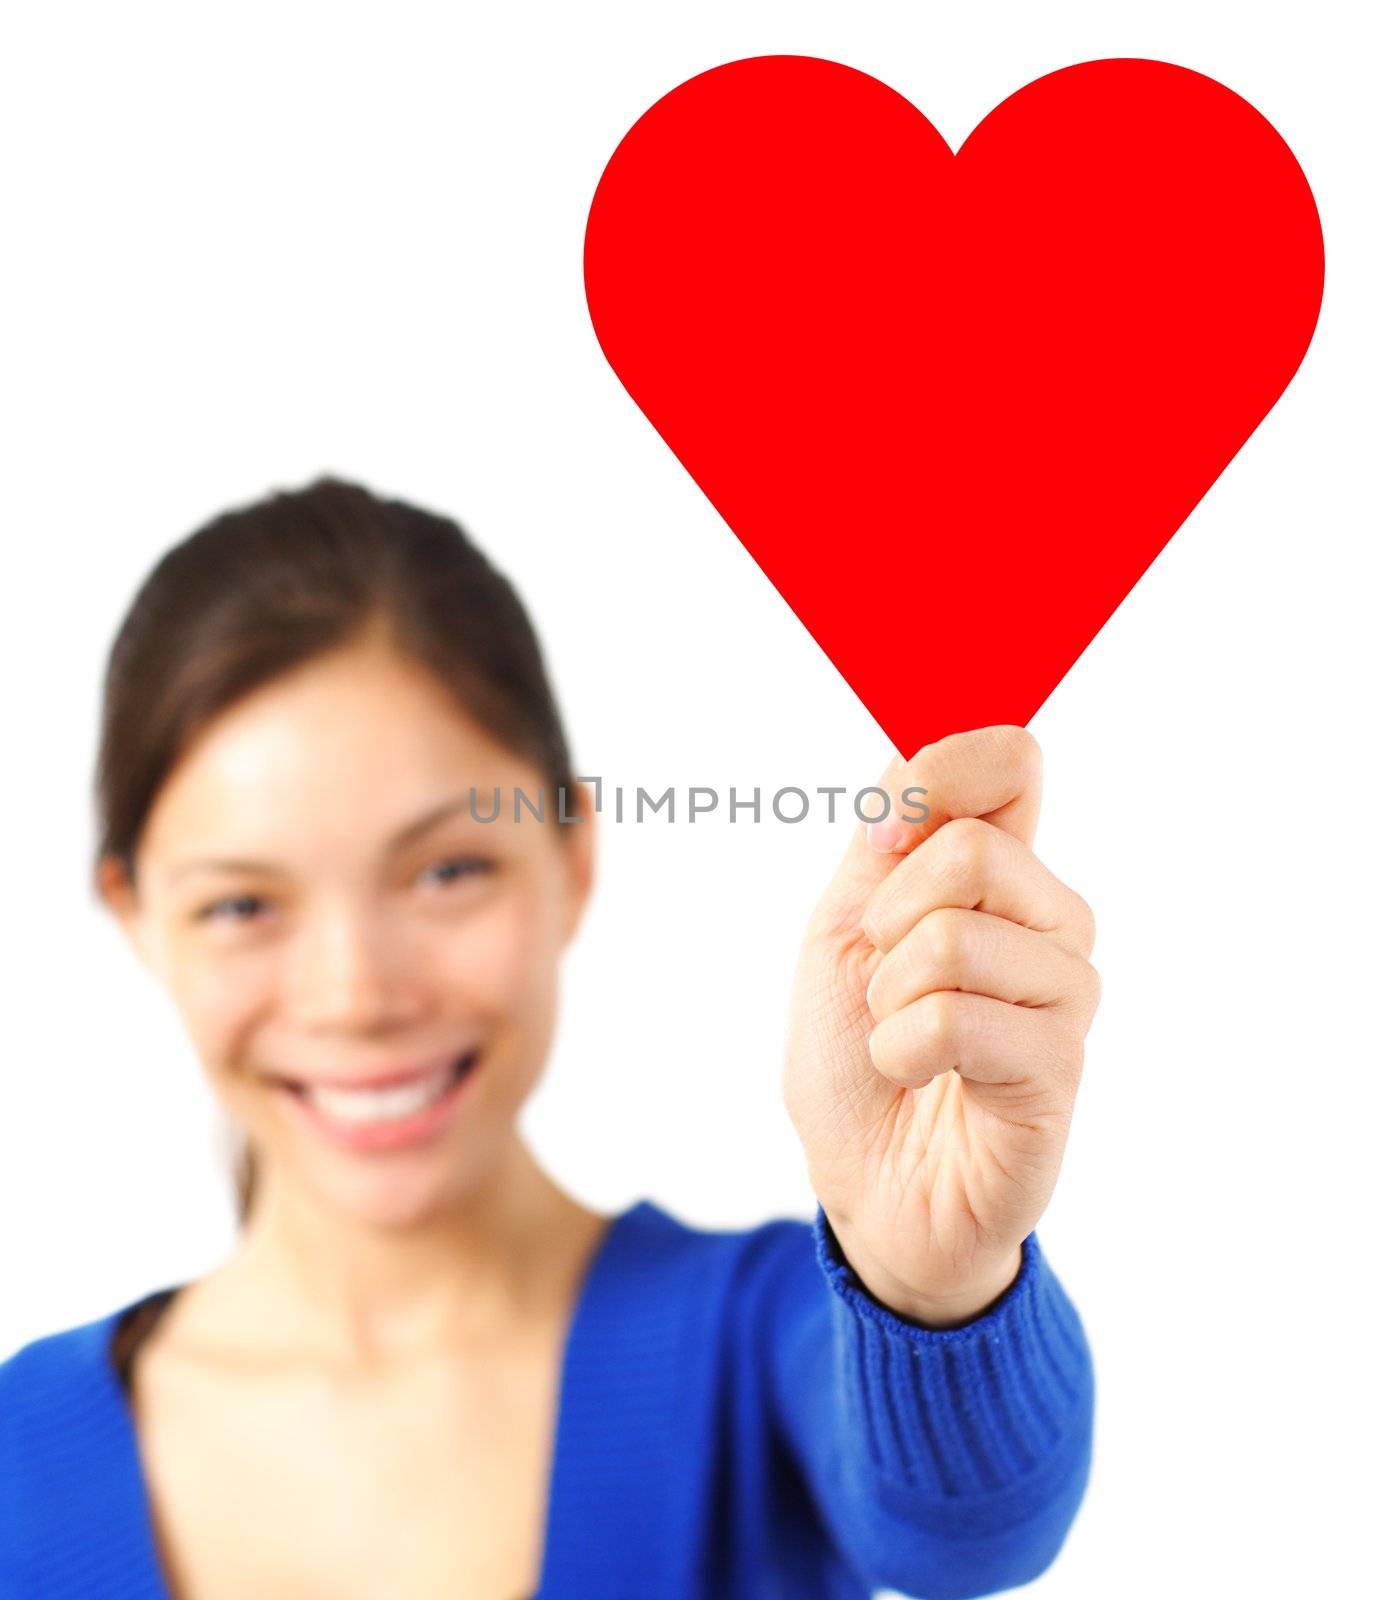 Cute woman in love holding a heart shape copy space to put your text in. Isolated on white background, focus on the heart sign.